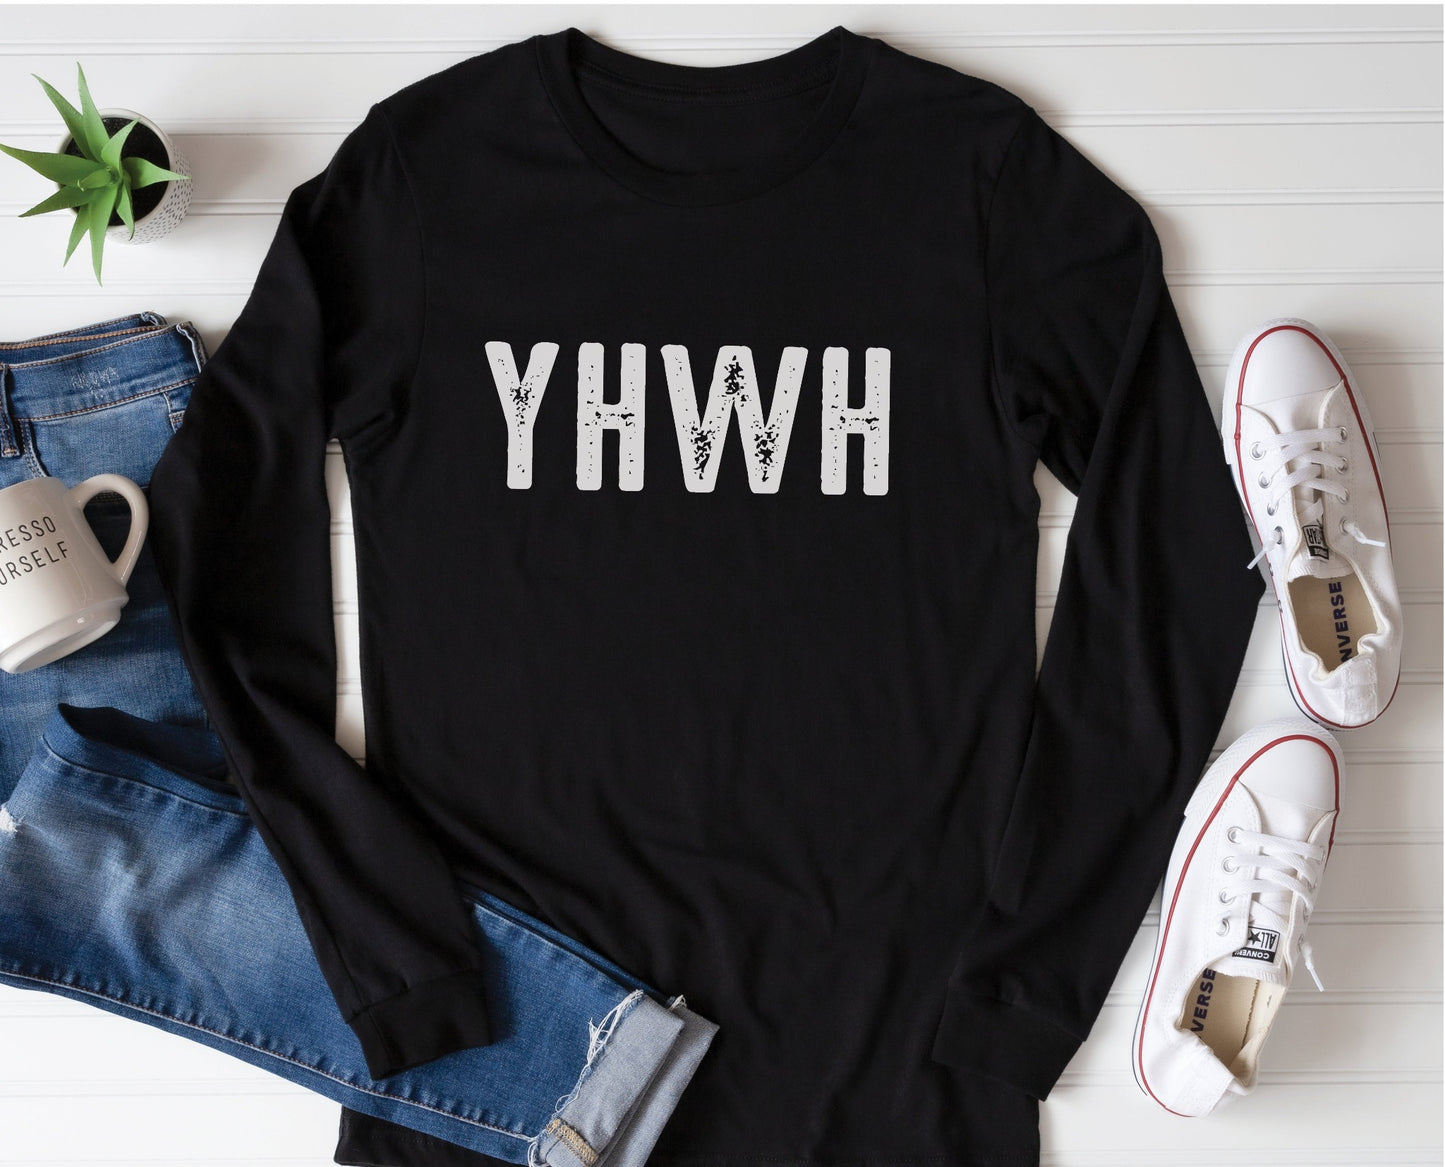 YHWH Hebrew Biblical Name of God Yahweh Christian aesthetic design printed in white distressed lettering on soft black long sleeve tee for men and women